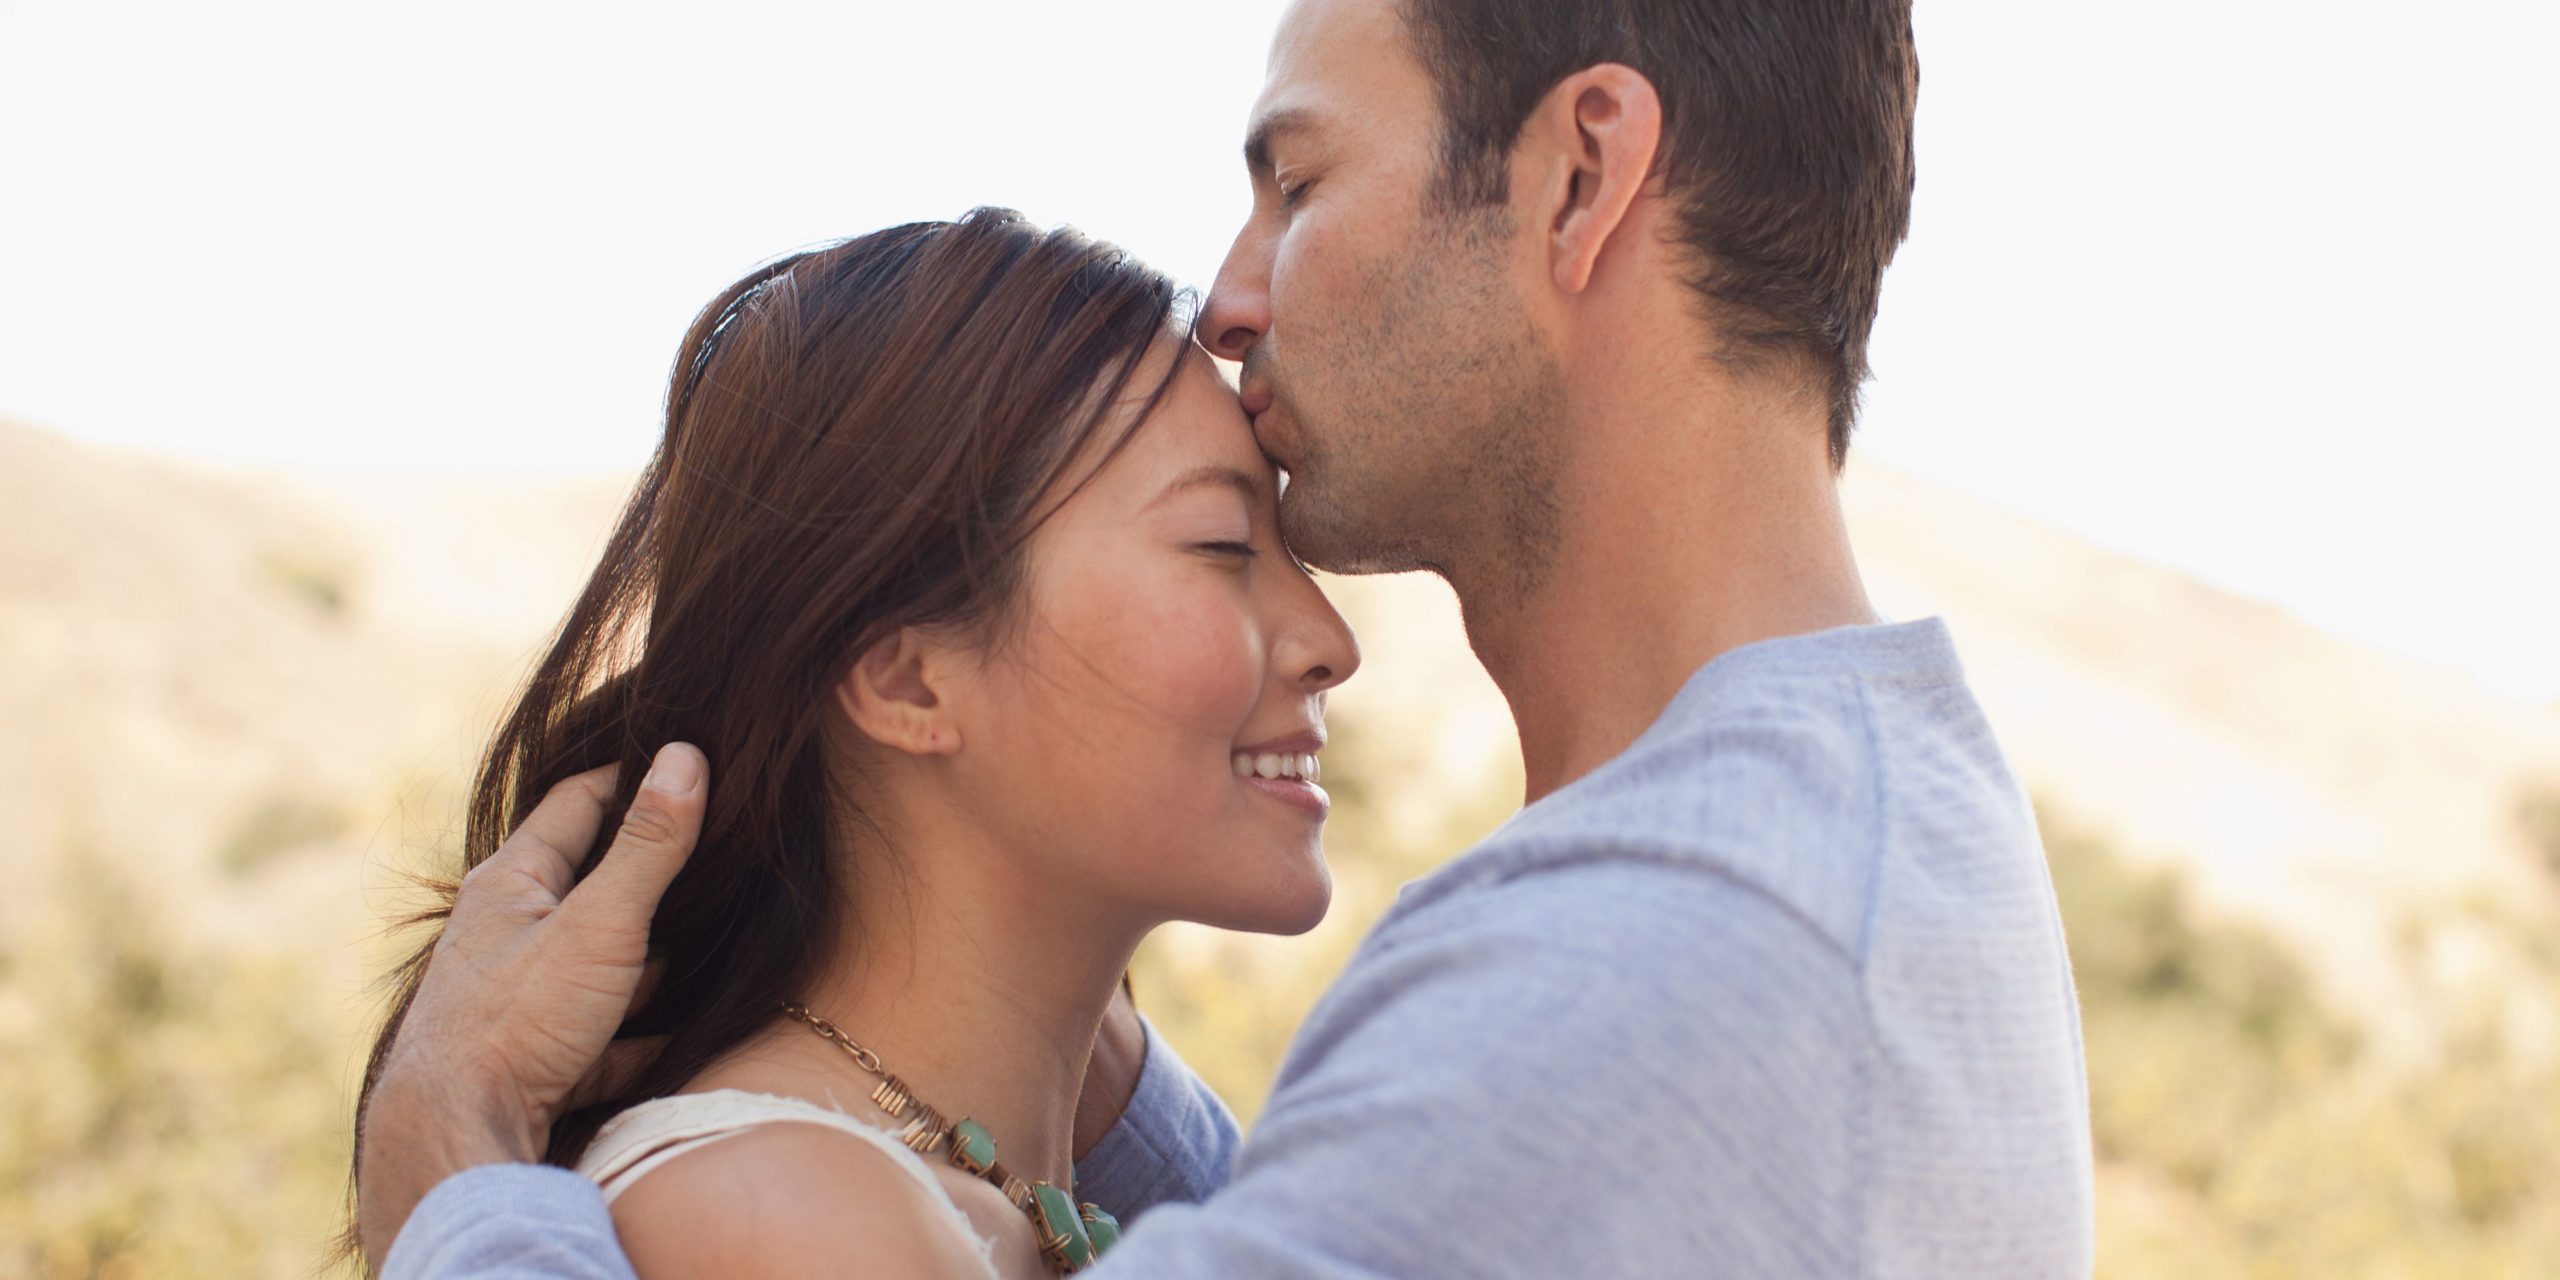 How to Tell Someone You Love Them in 5 Simple Steps